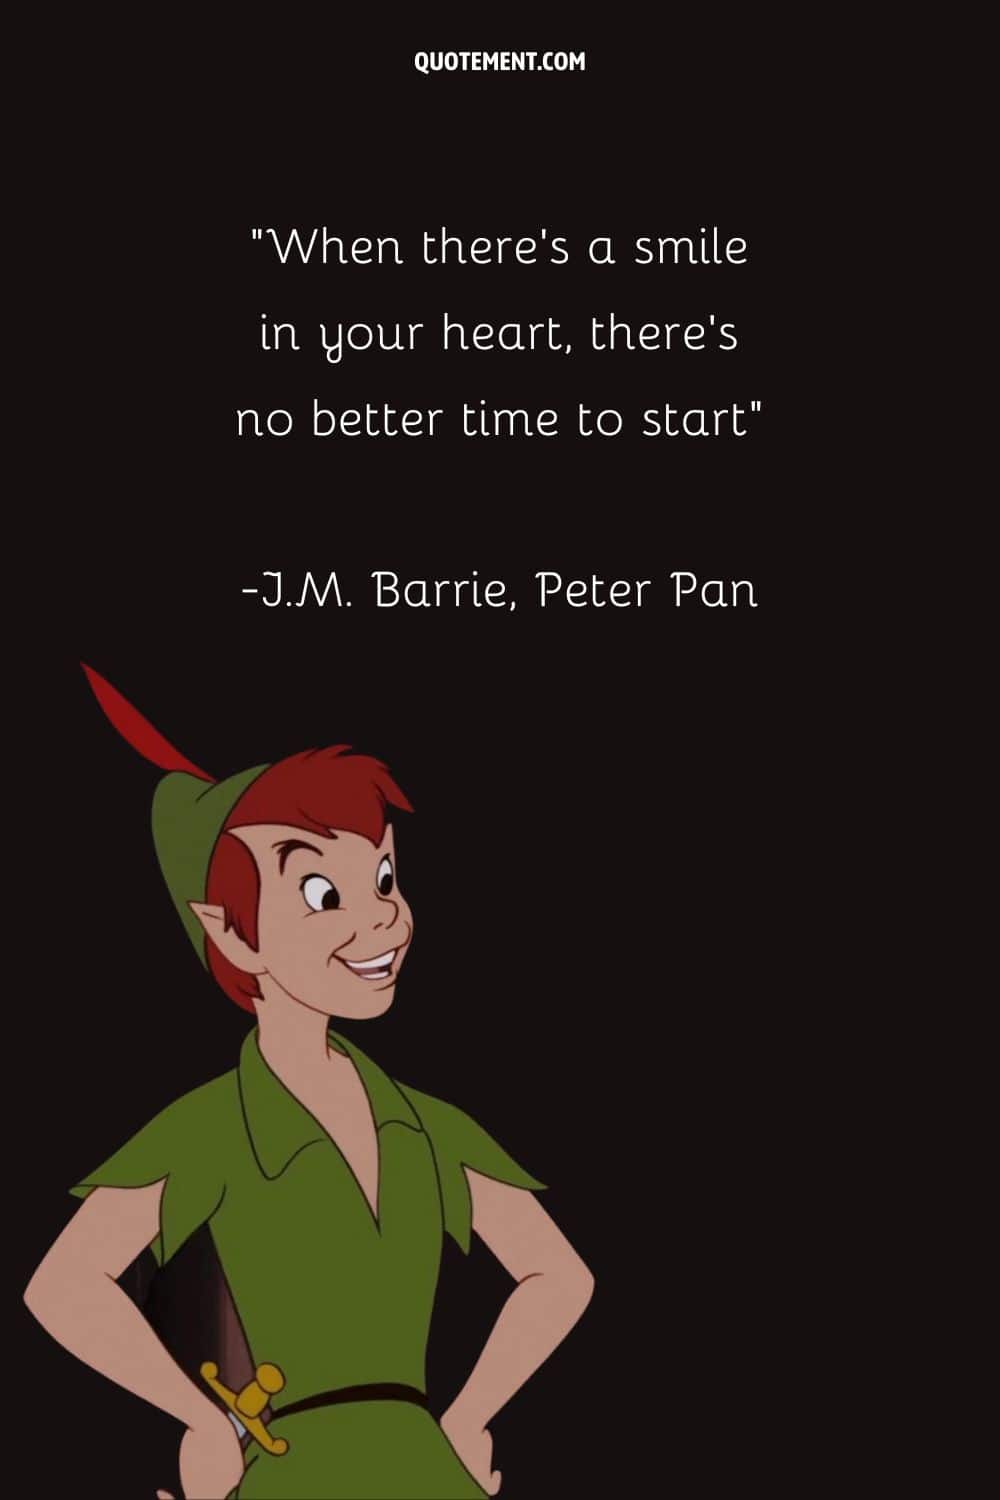 “When there's a smile in your heart, there's no better time to start” ― J.M. Barrie, Peter Pan